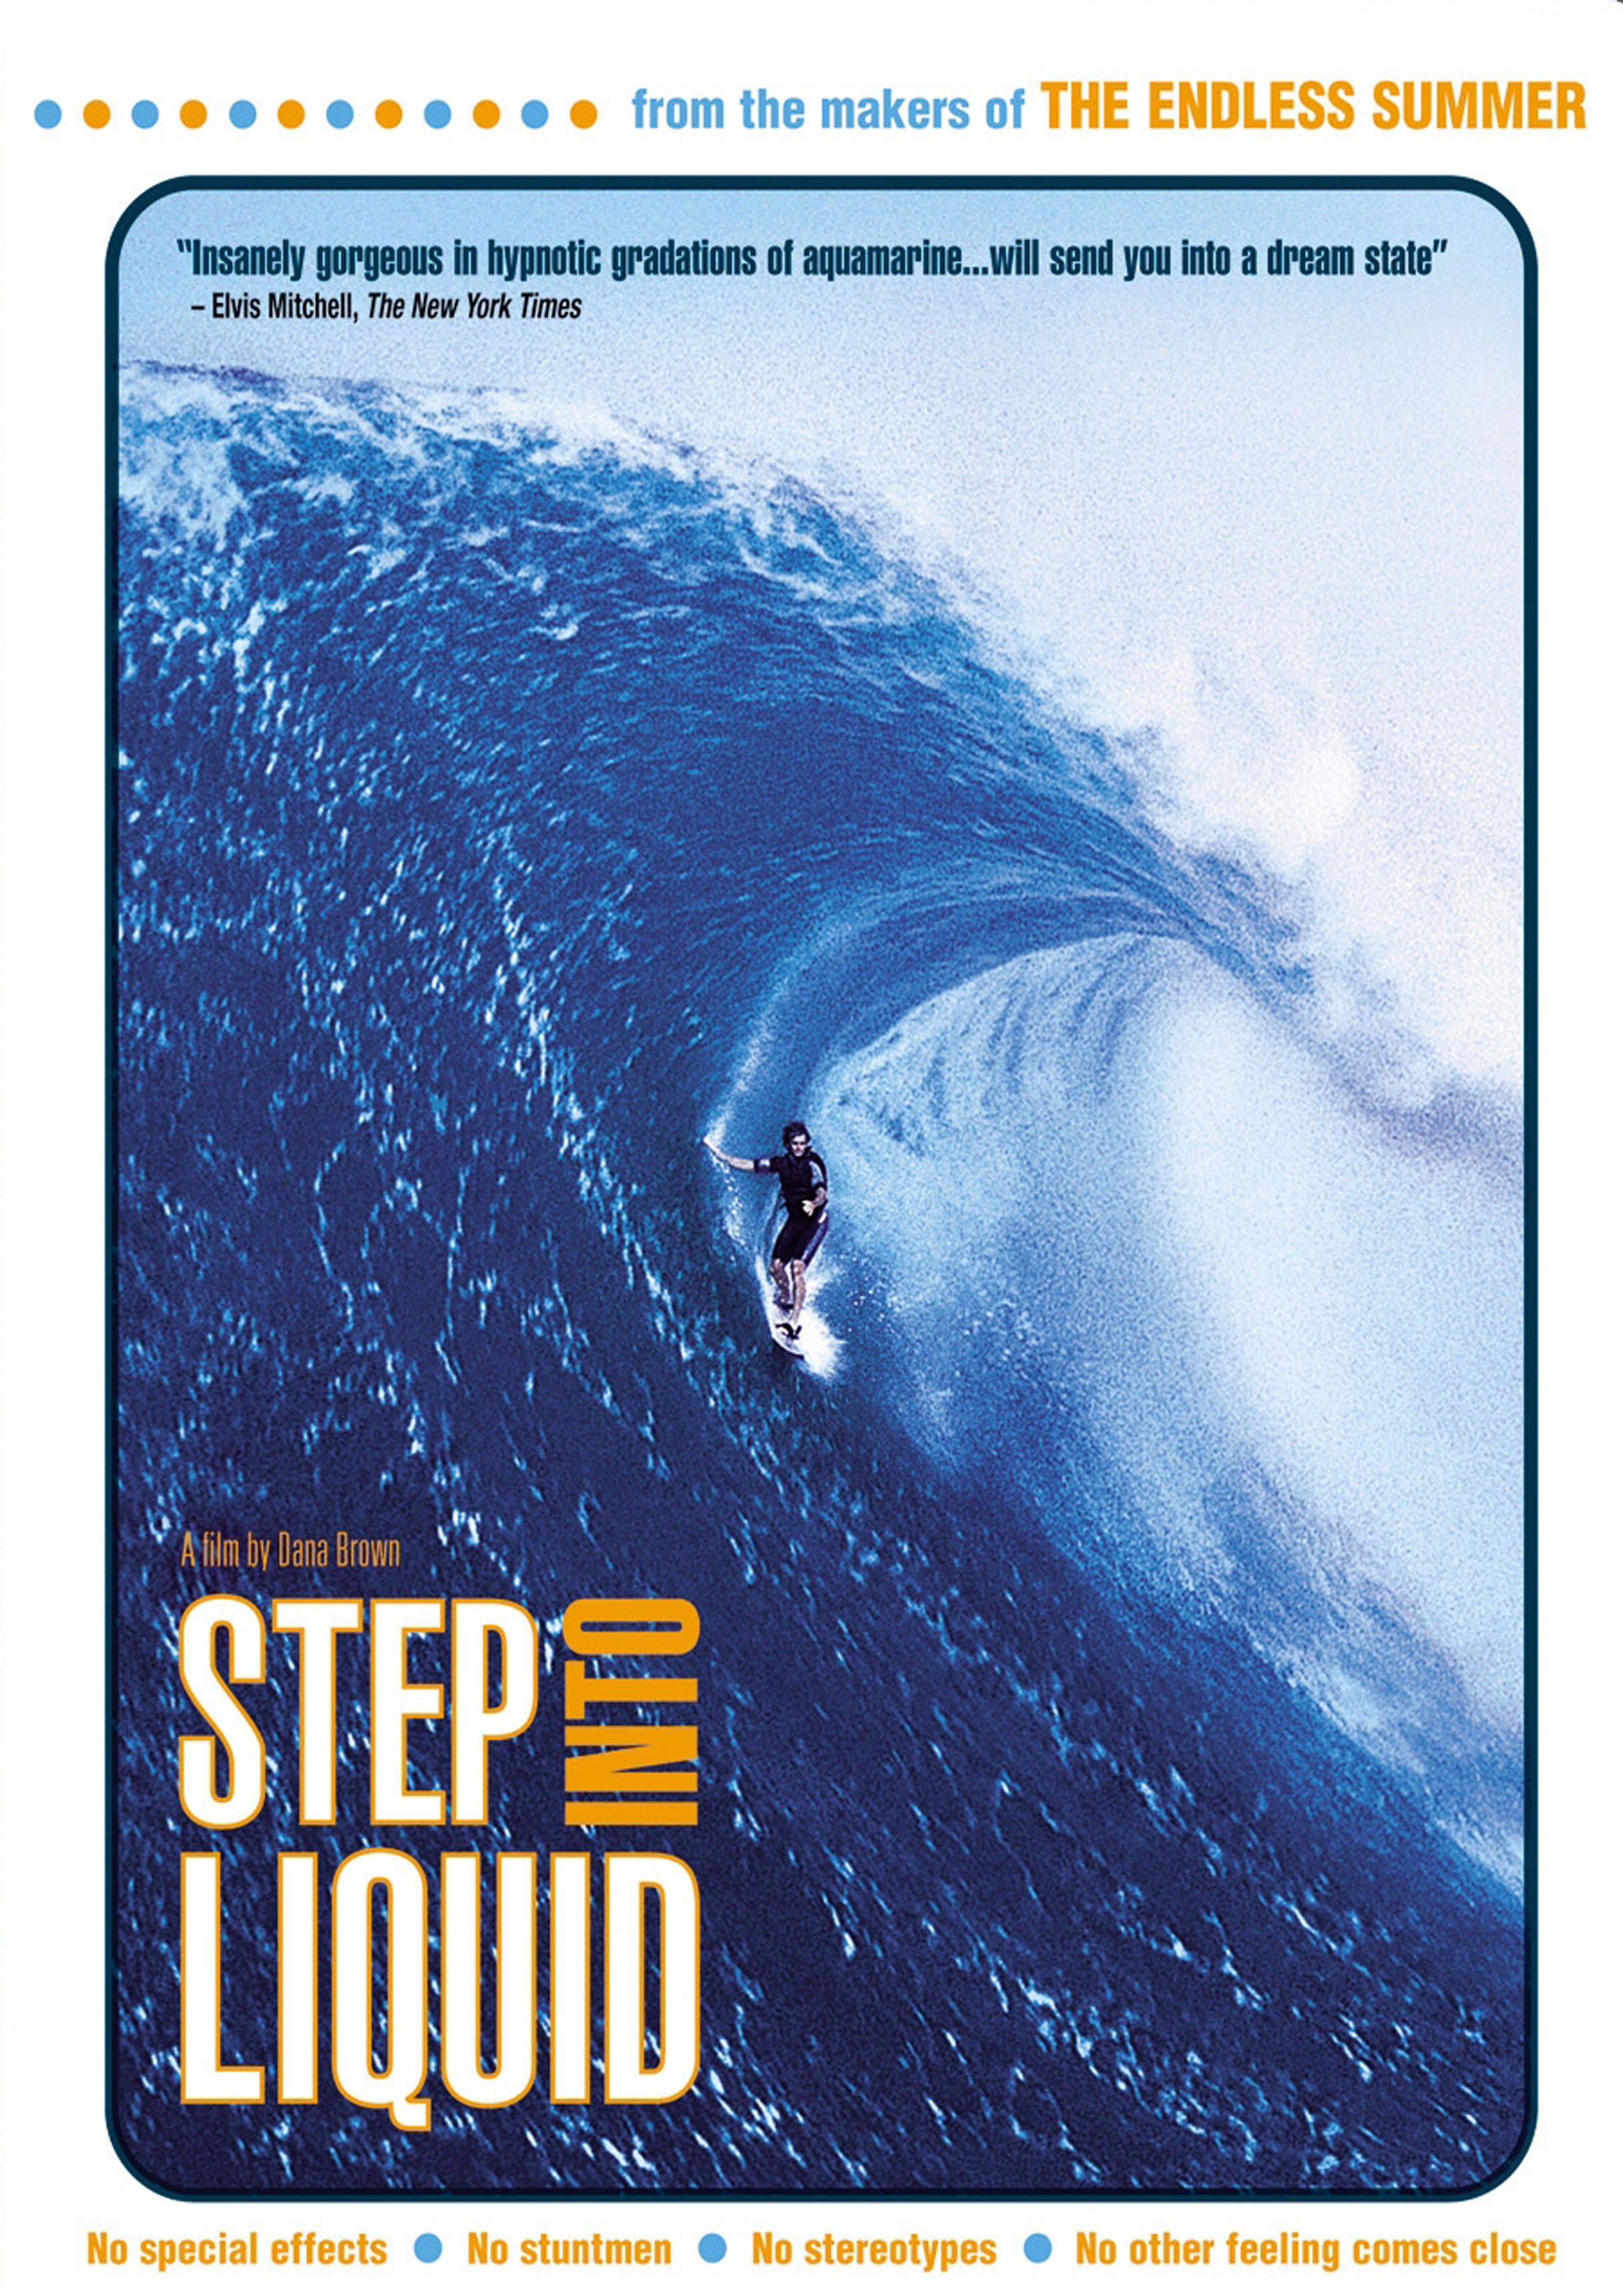 Movie poster for Step into Liquid with surfer dropping into sick pipe